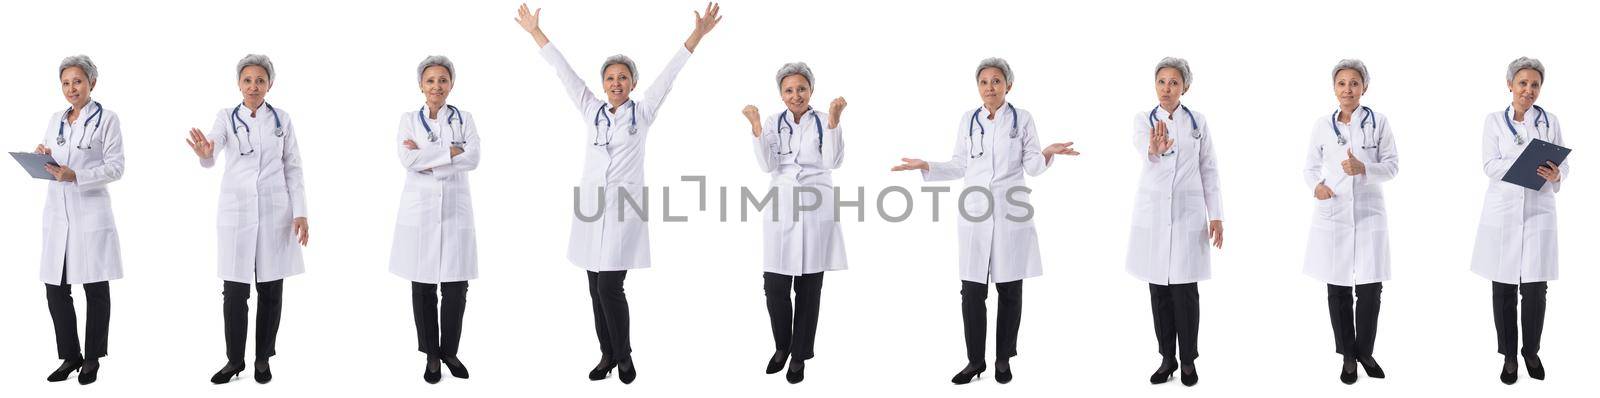 Set of asian medical doctor full length portraits doing different gestures isolated on white background